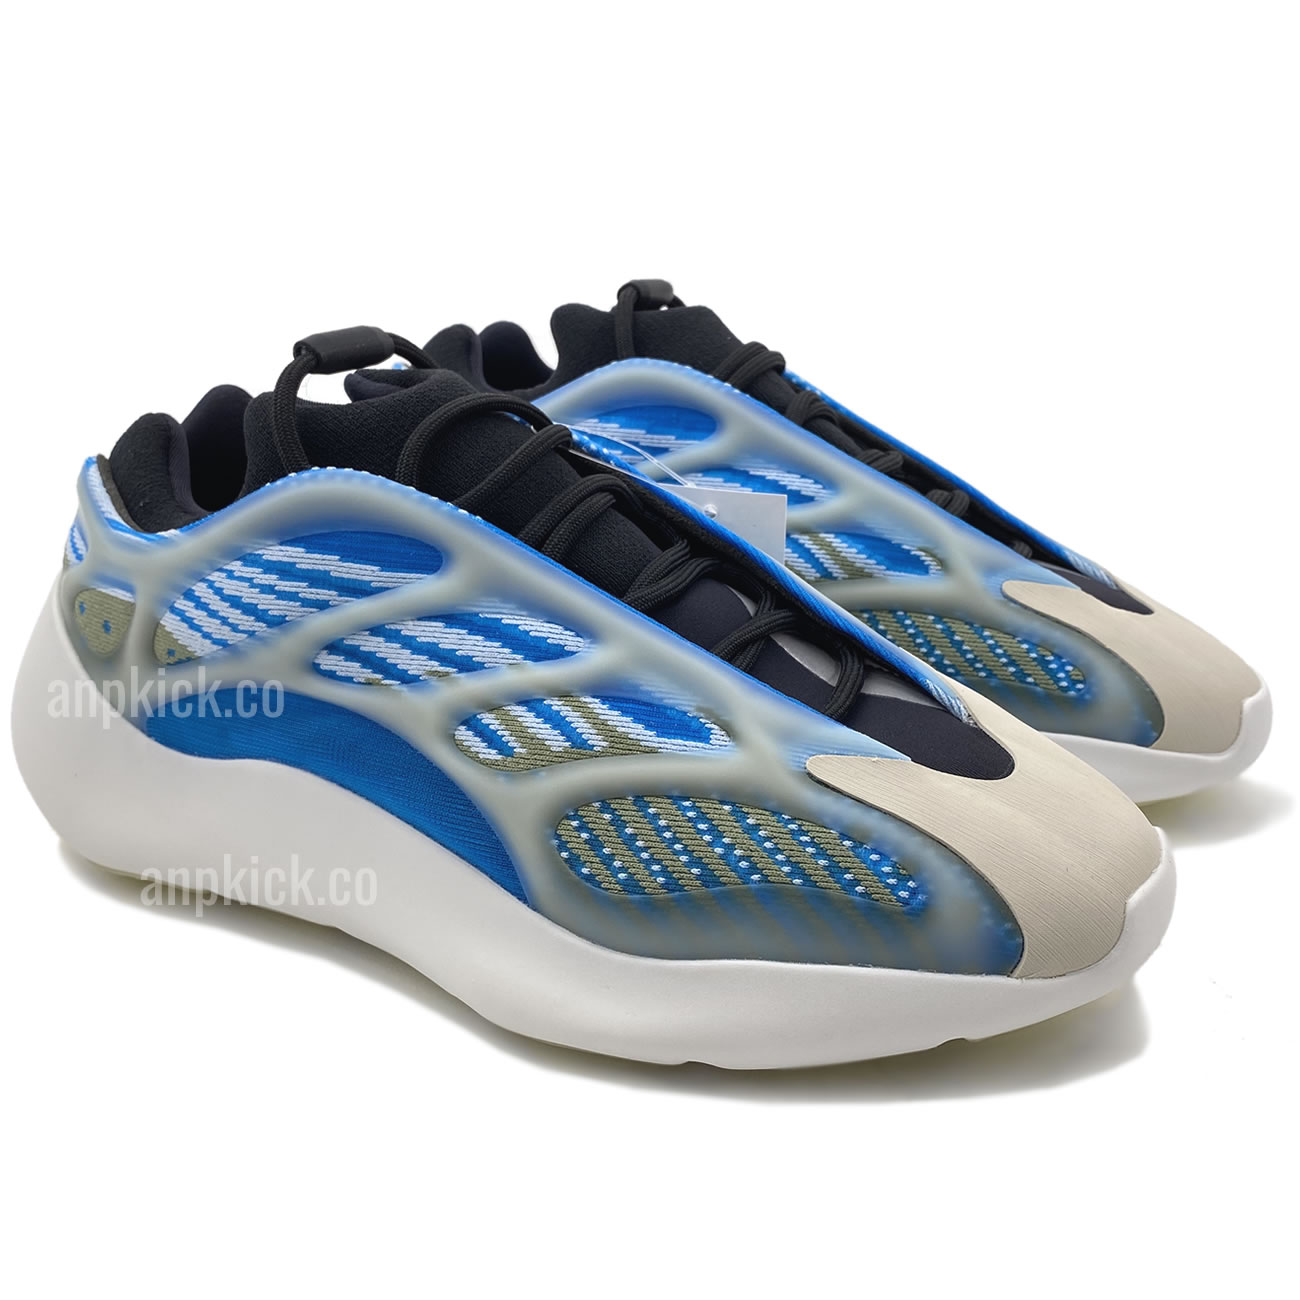 Adidas Yeezy 700 V3 Arazre G54850 New Release Date For Sale (3) - newkick.org